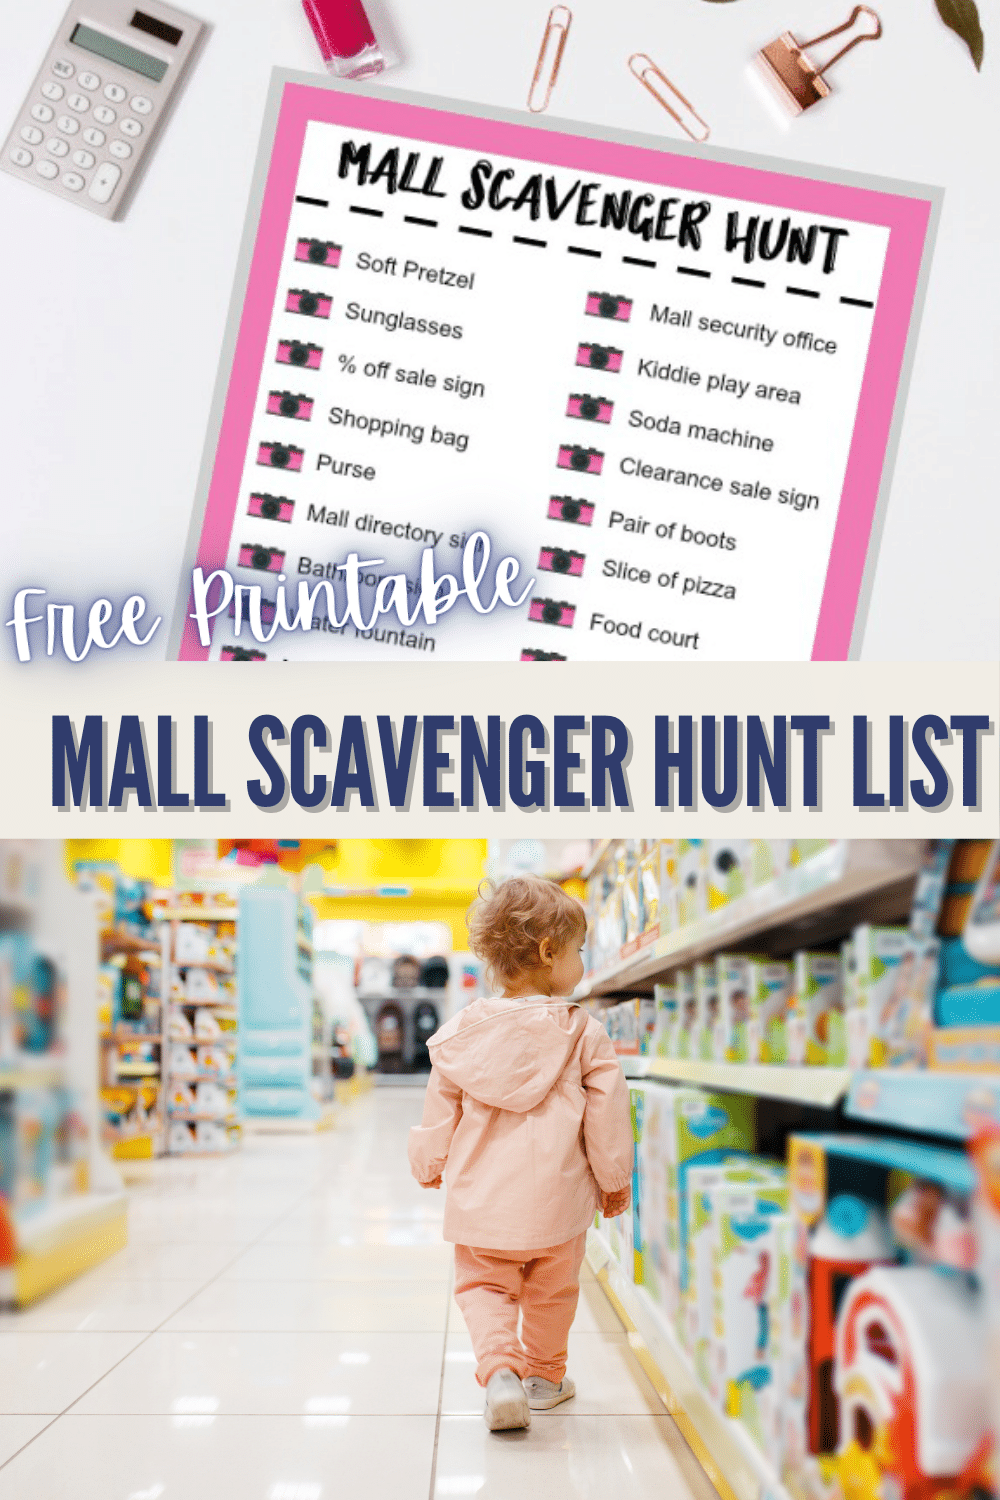 A mall scavenger hunt is a fun way to spend an afternoon. This free printable mall scavenger hunt list is perfect for kids, teens and even adults. #scavengerhunt #printables #freeprintables via @wondermomwannab